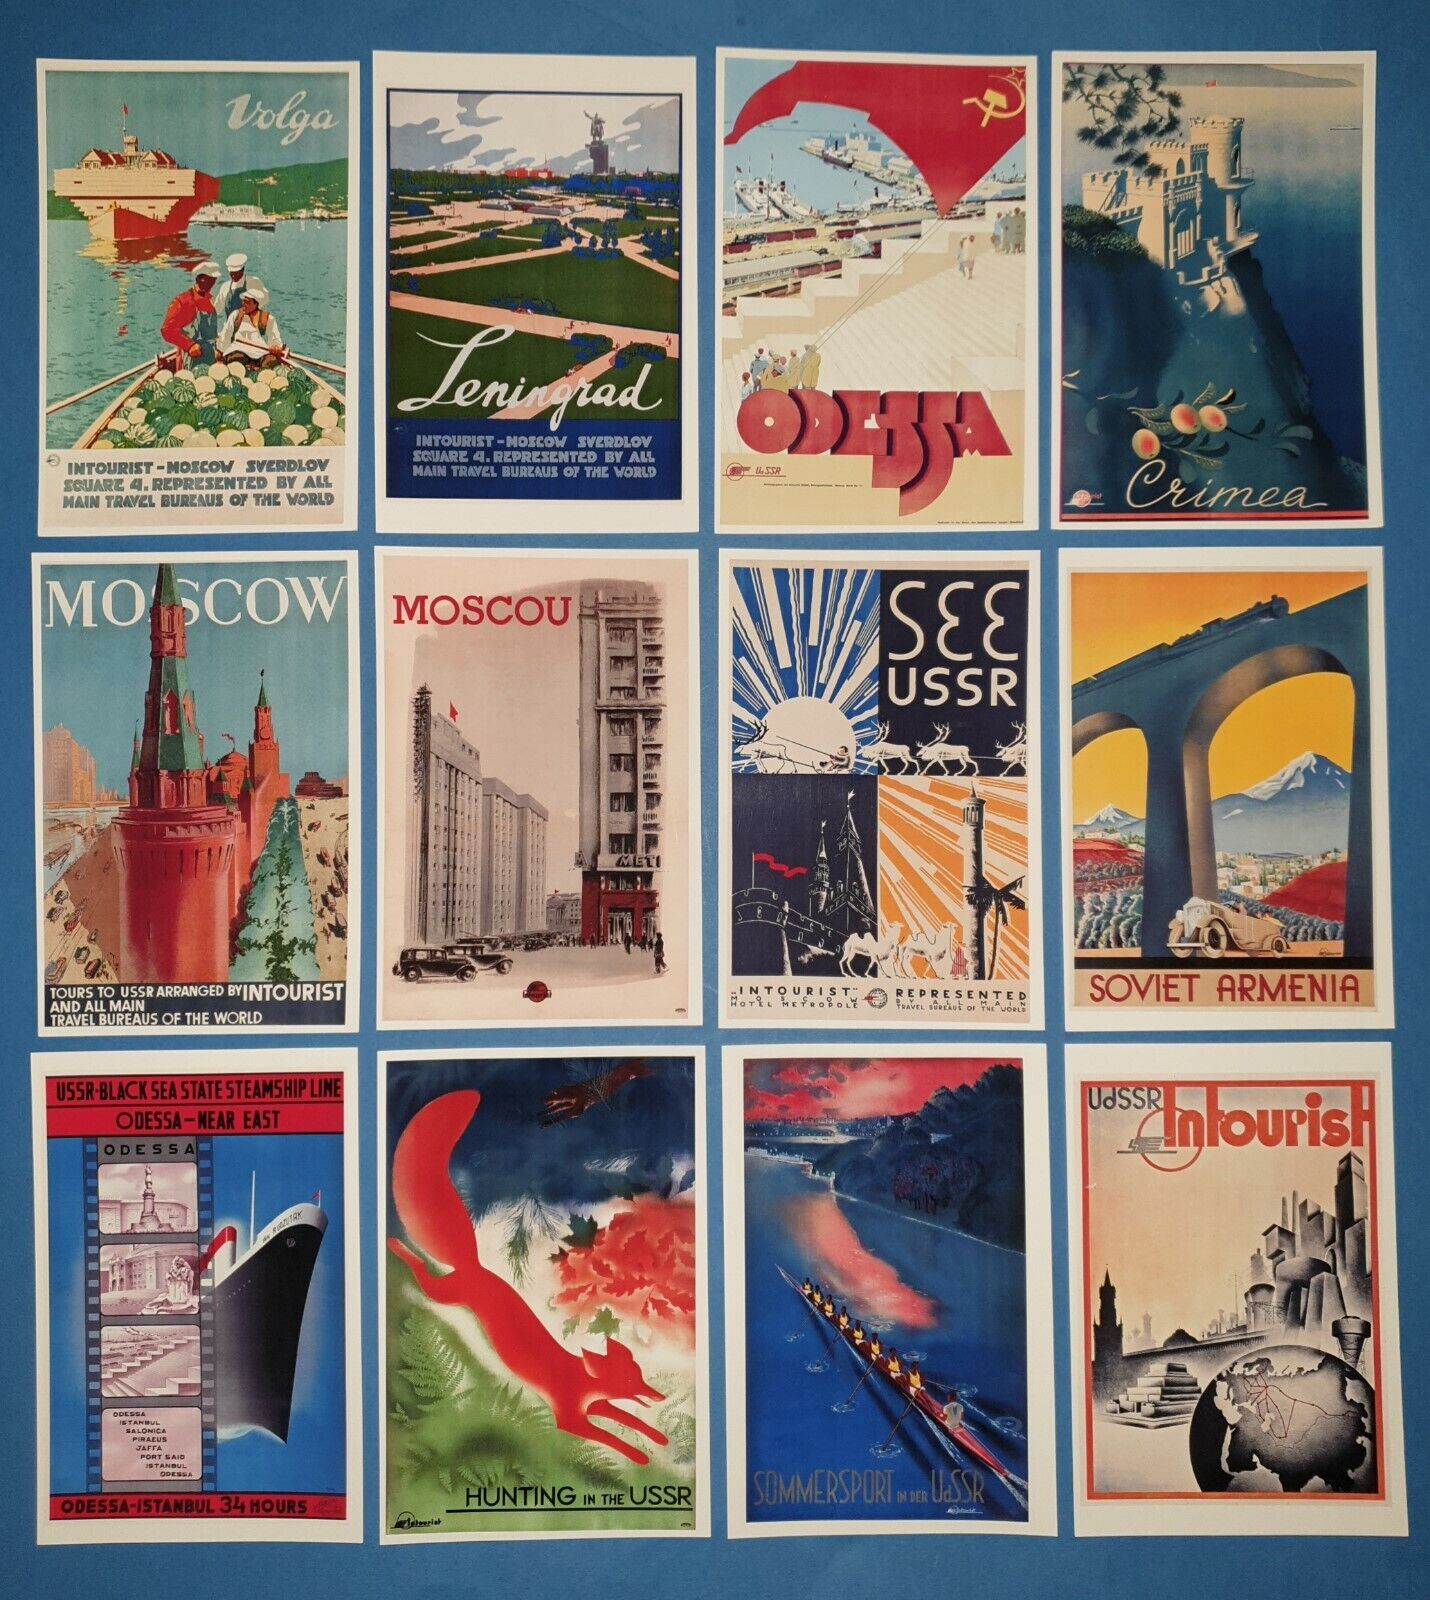 Set of 12 New Postcards, Russia, Soviet, USSR, CCCP, Vintage Travel Posters 85L